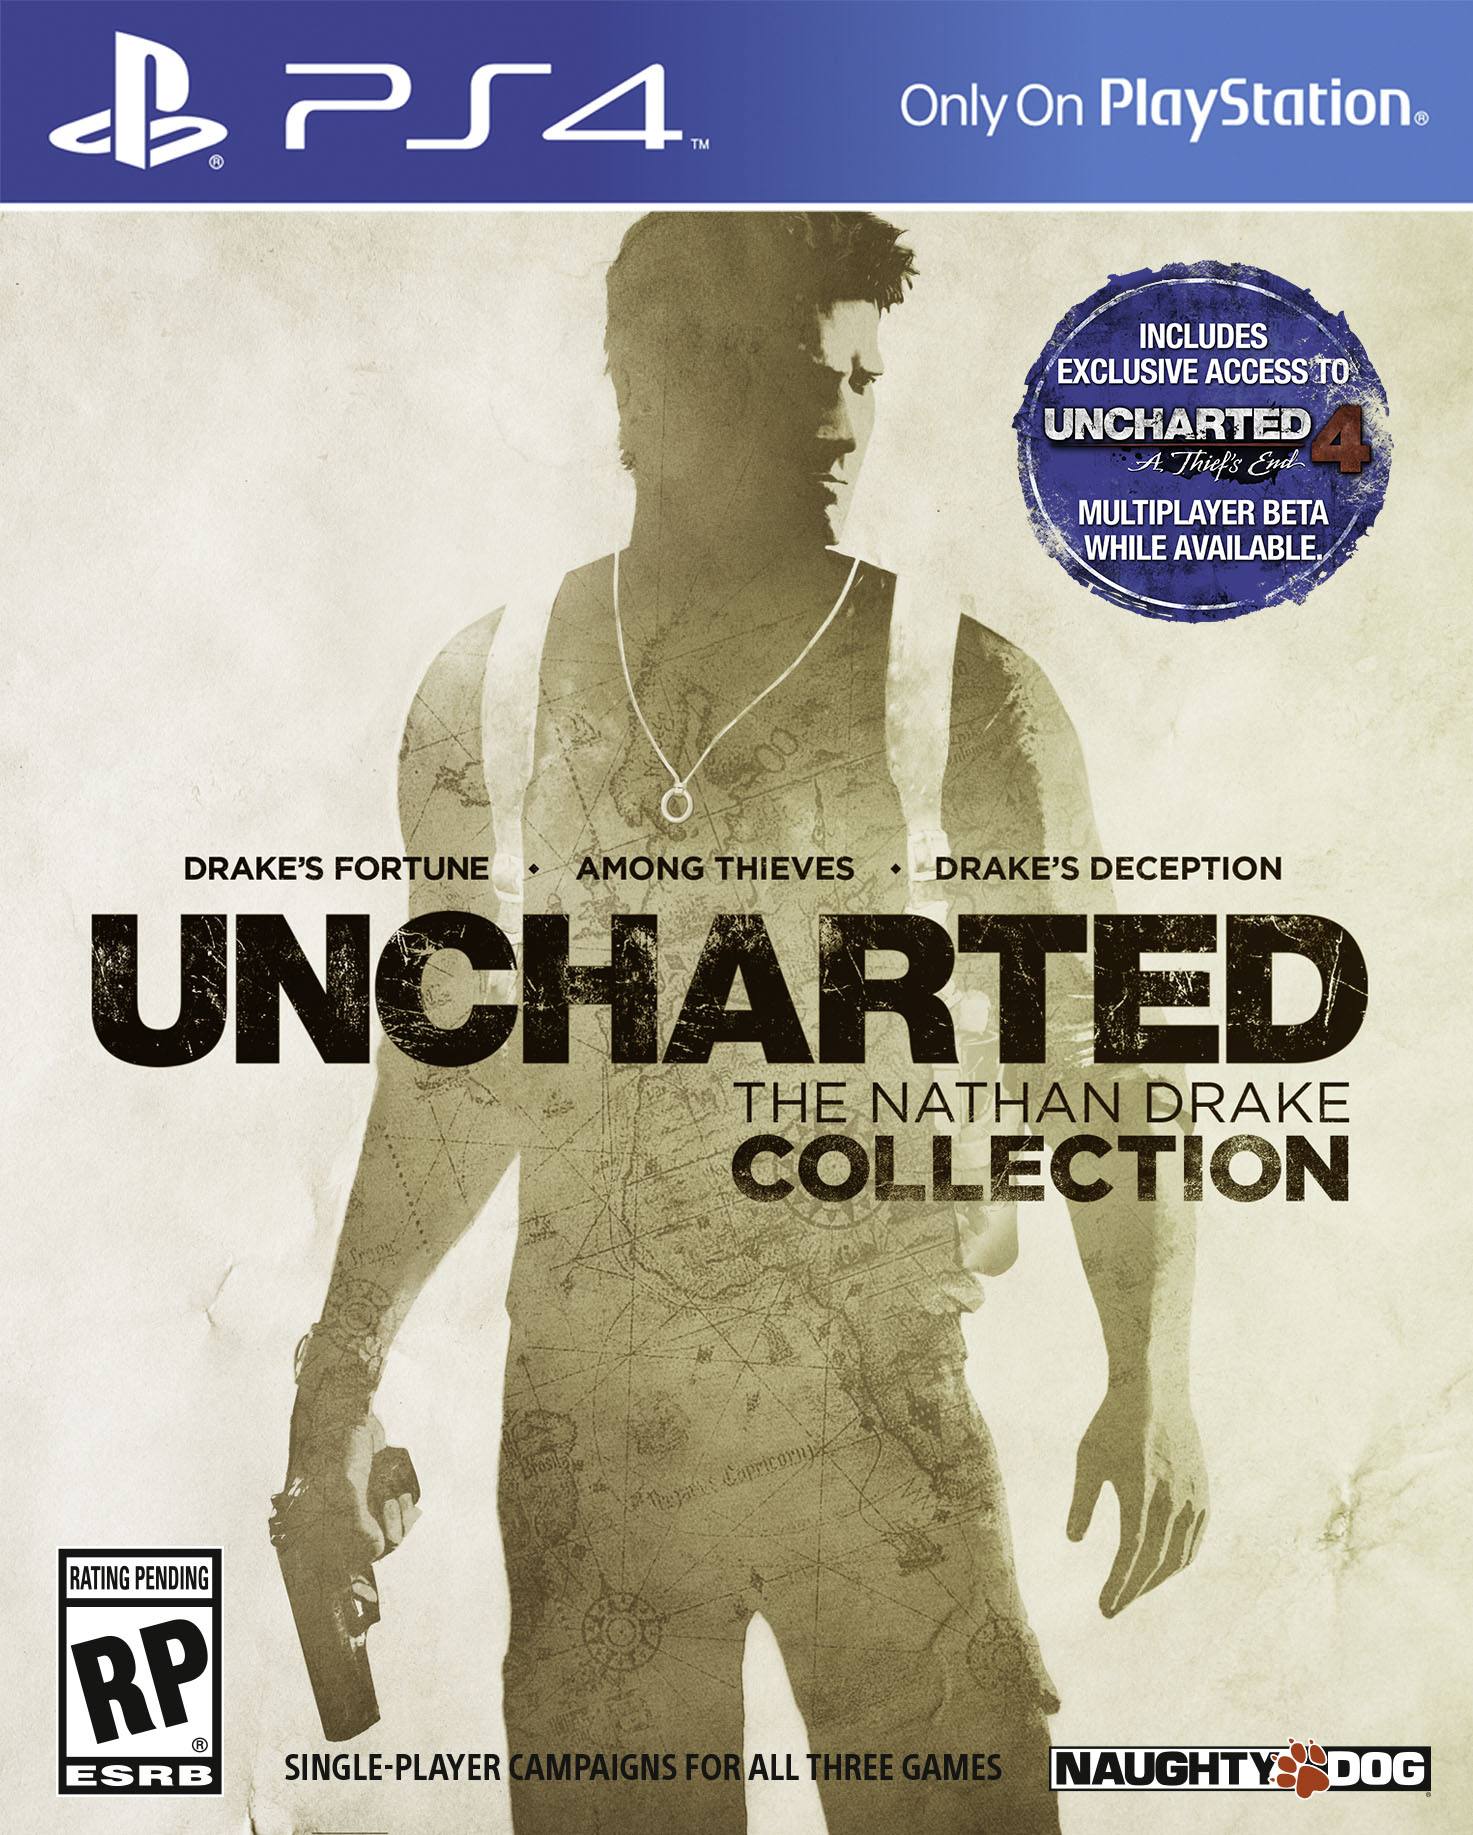 UNCHARTED COLLECTION: THE NATHAN DRAKE ps4